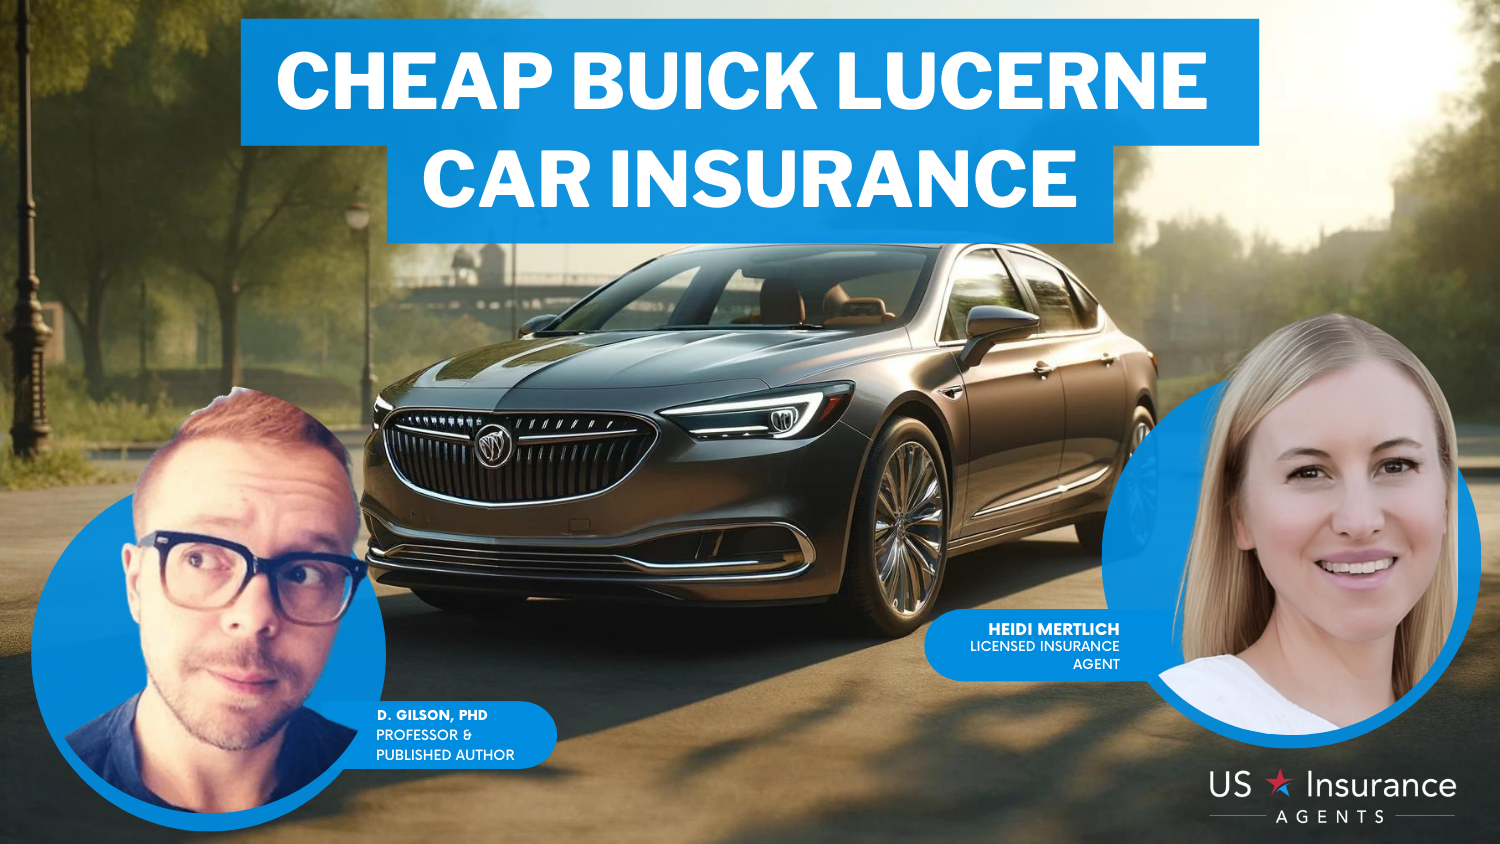 Cheap Buick Lucerne Car Insurance: Allstate, Erie, and AAA